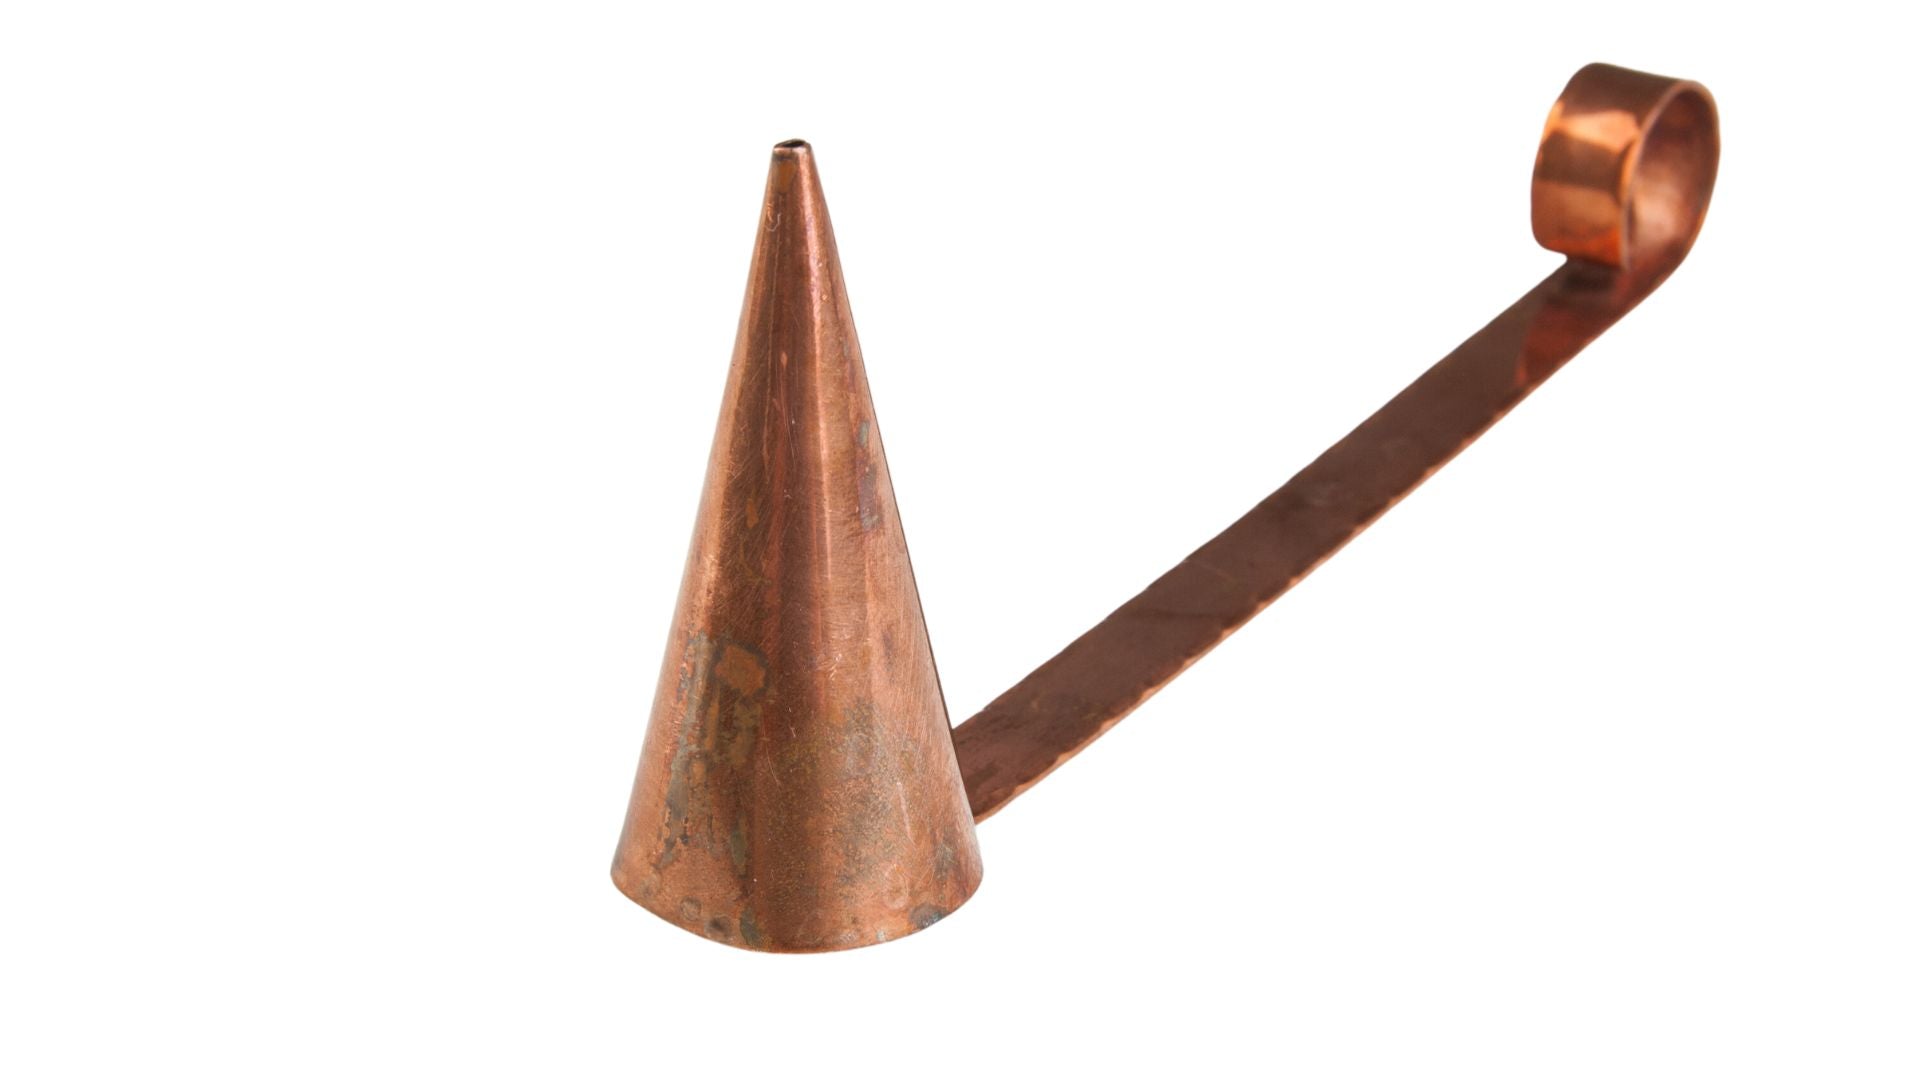 Collombatti Naturals the art of caring and burning beeswax candles picture of a copper candle snuffer